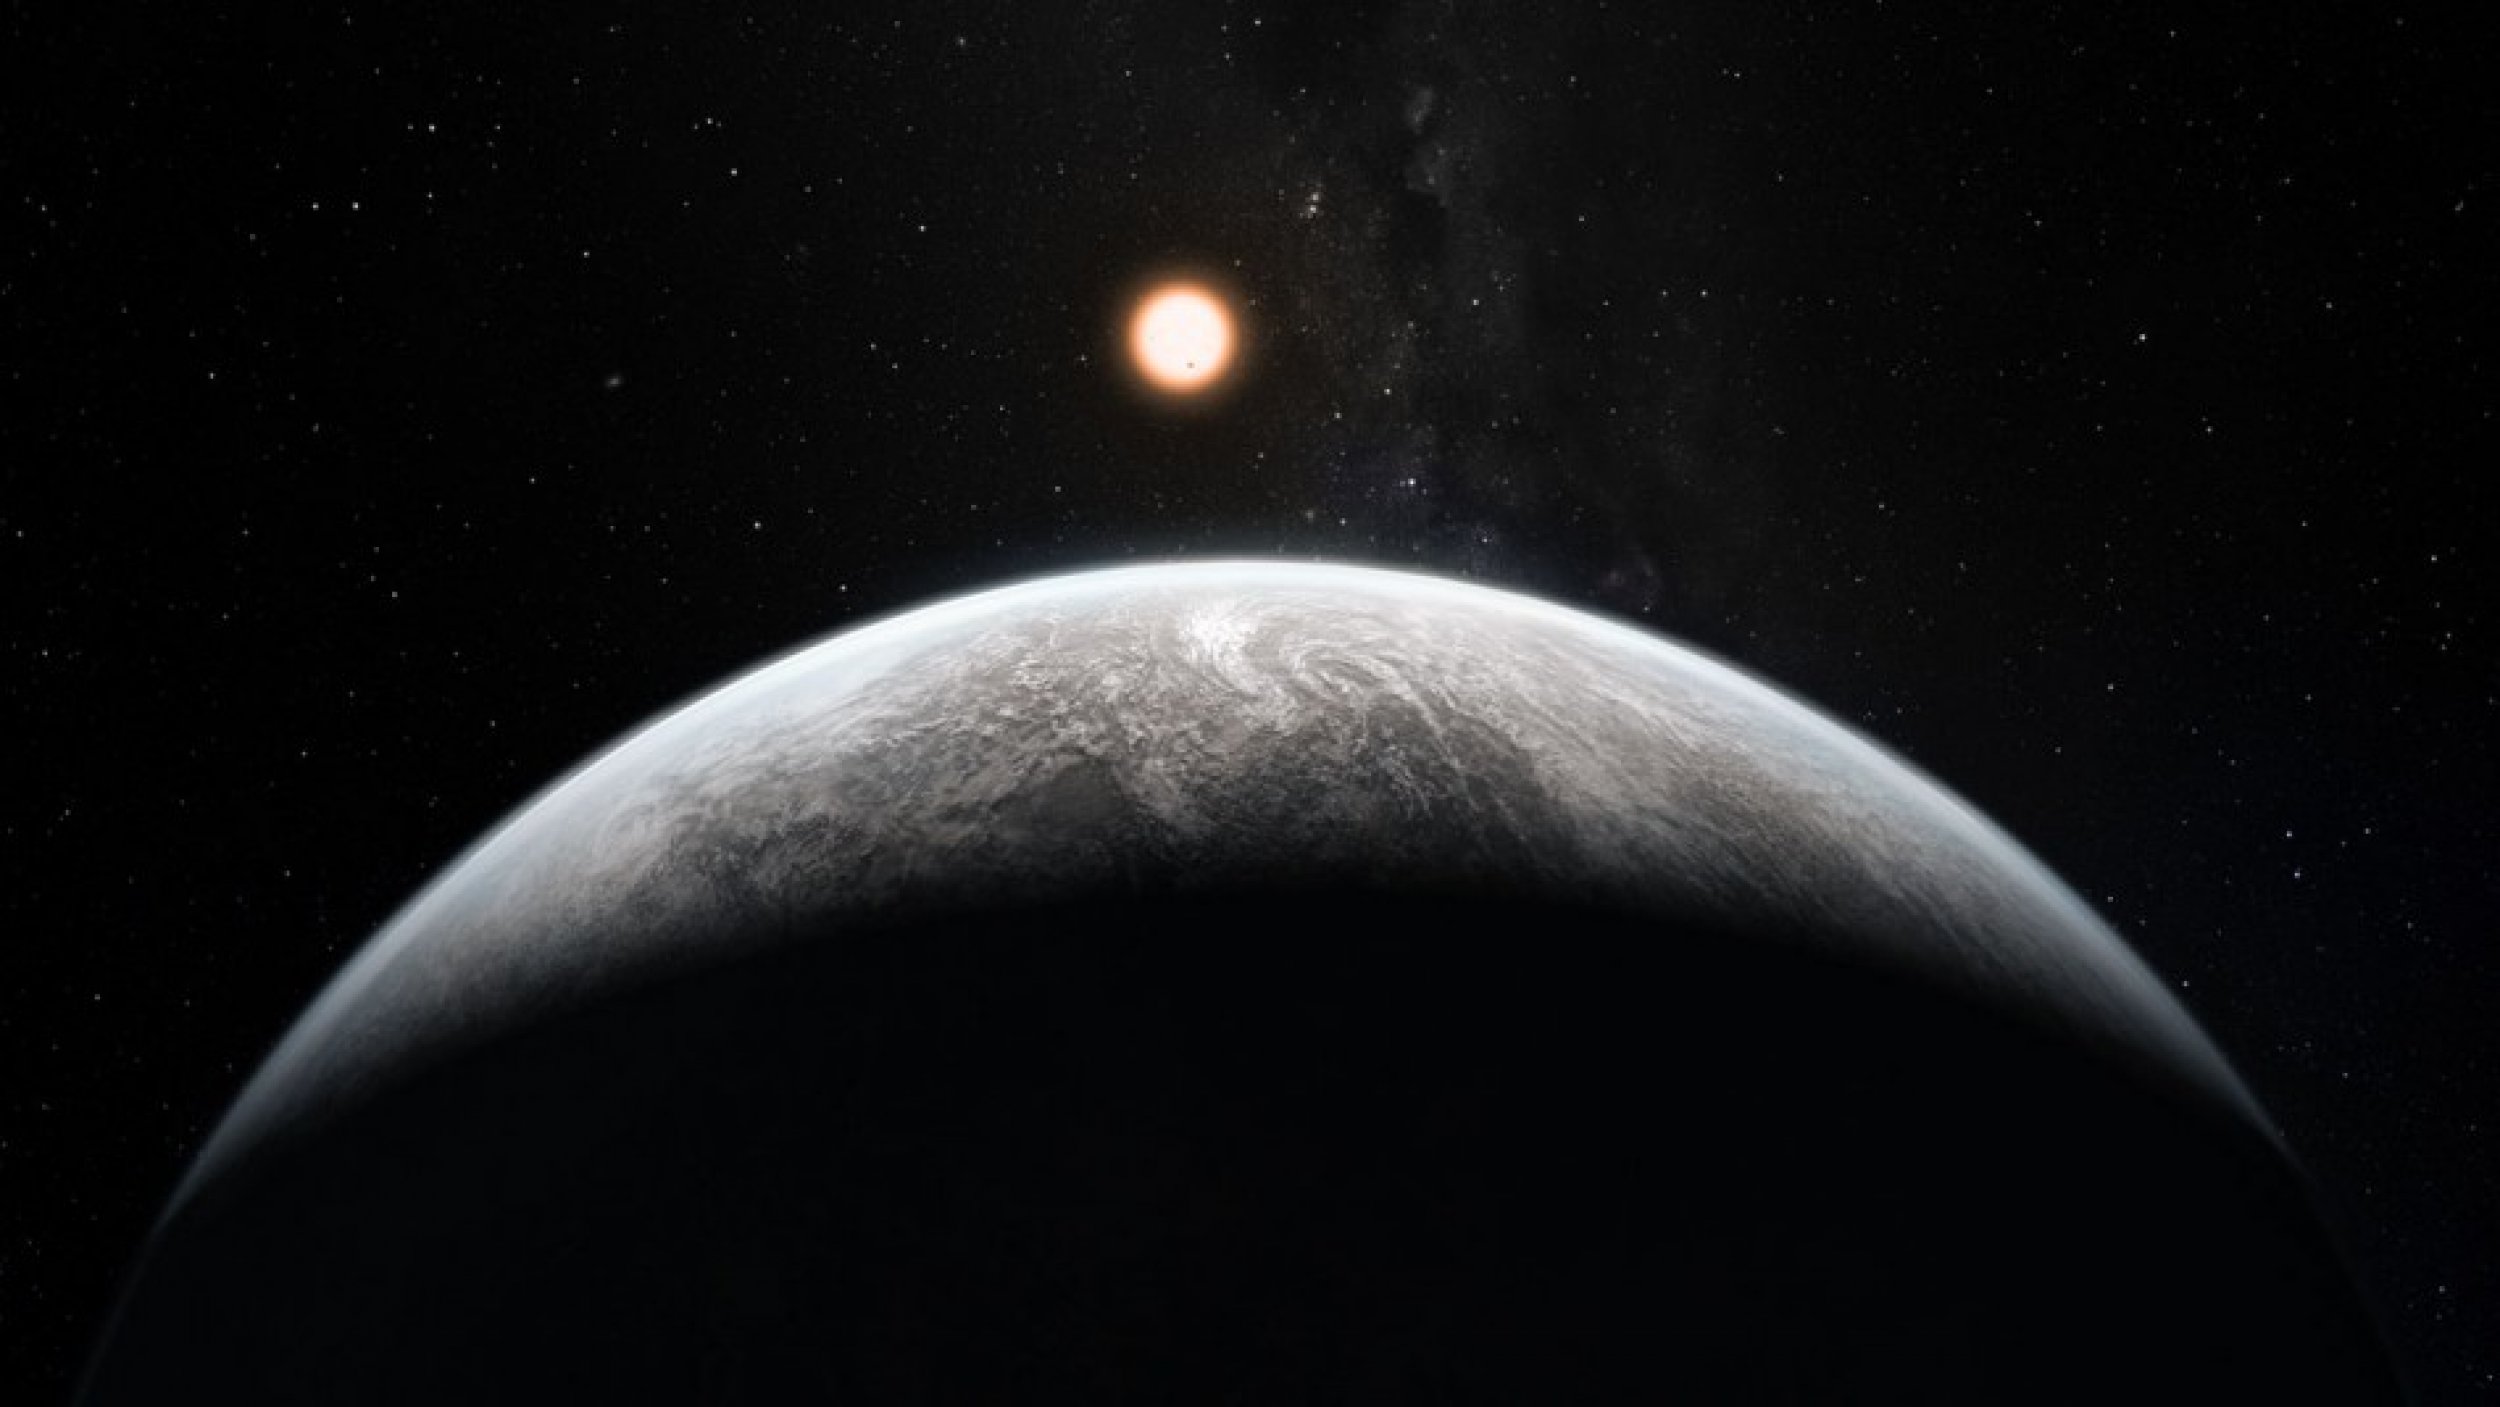 This artists impression shows the planet orbiting the Sun-like star HD 85512 in the southern constellation of Vela The Sail.